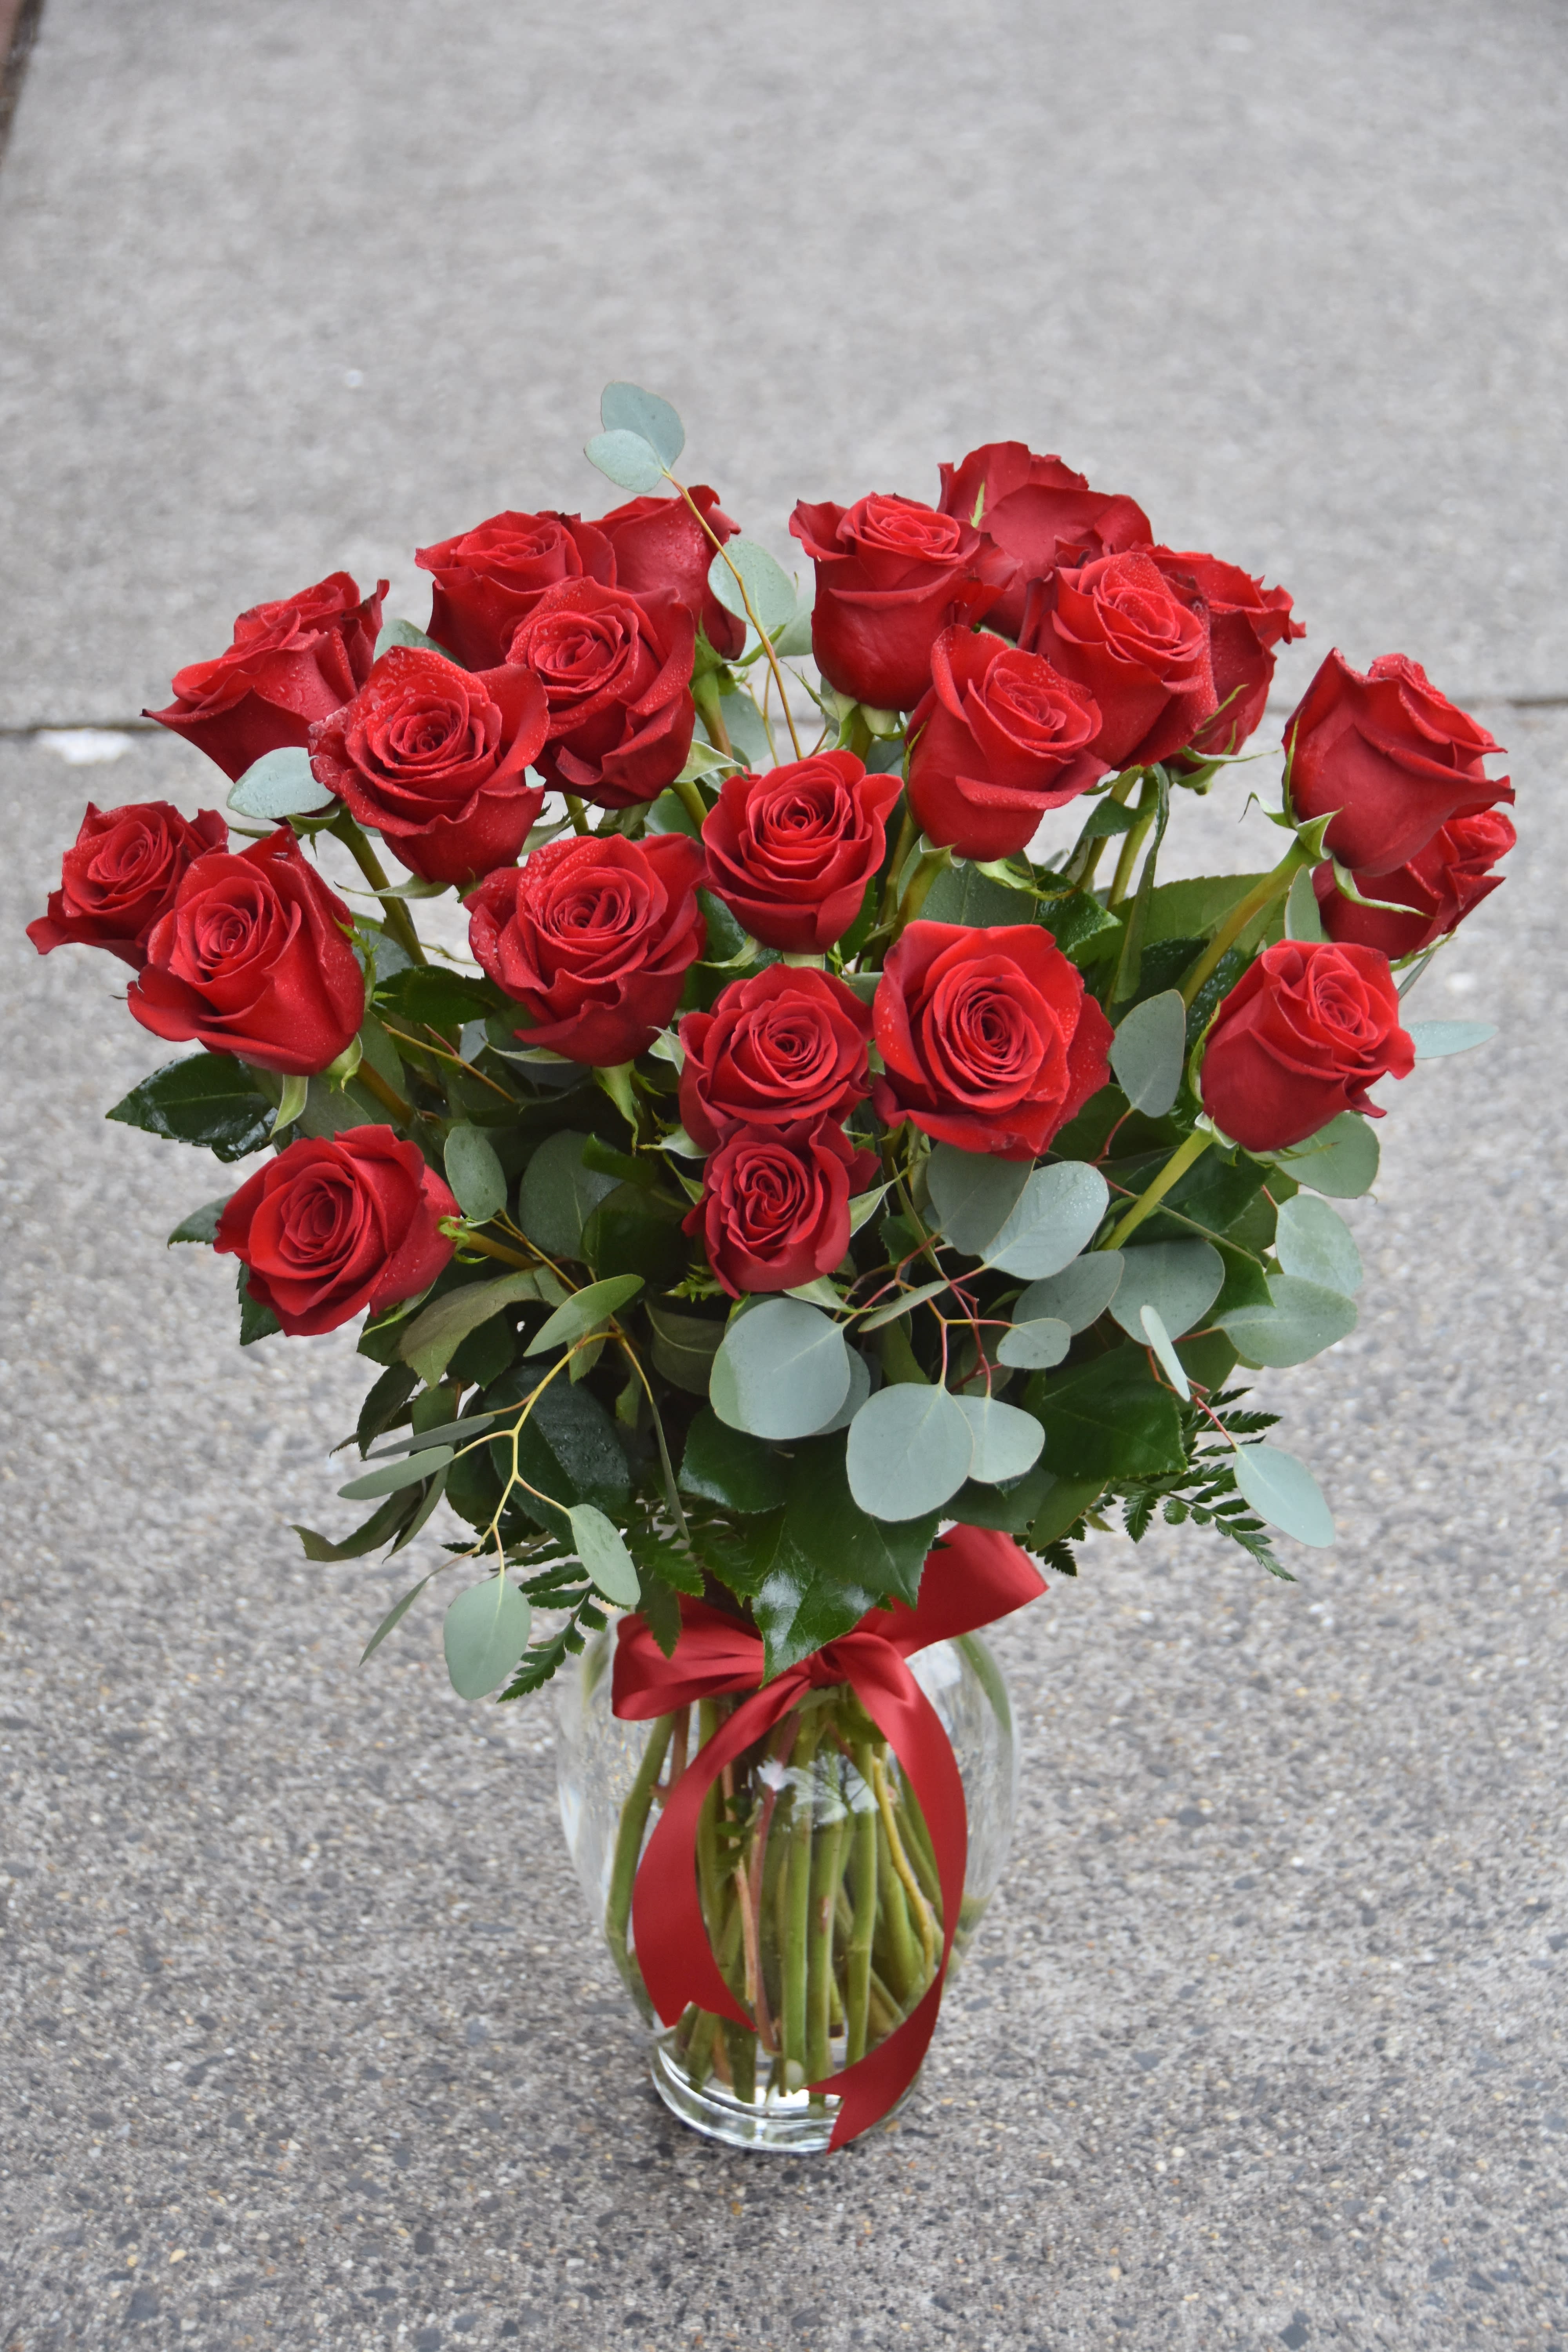 My Perfect Love - Two dozen Freedom red roses classically arranged in clear glass vase with beautiful lush foliage.  Perfect to &quot;WOW!&quot; your love. Also available in other colors. Please call 301-270-1848 or email us at Jeanne@ParkFlorist.us for your special color request.